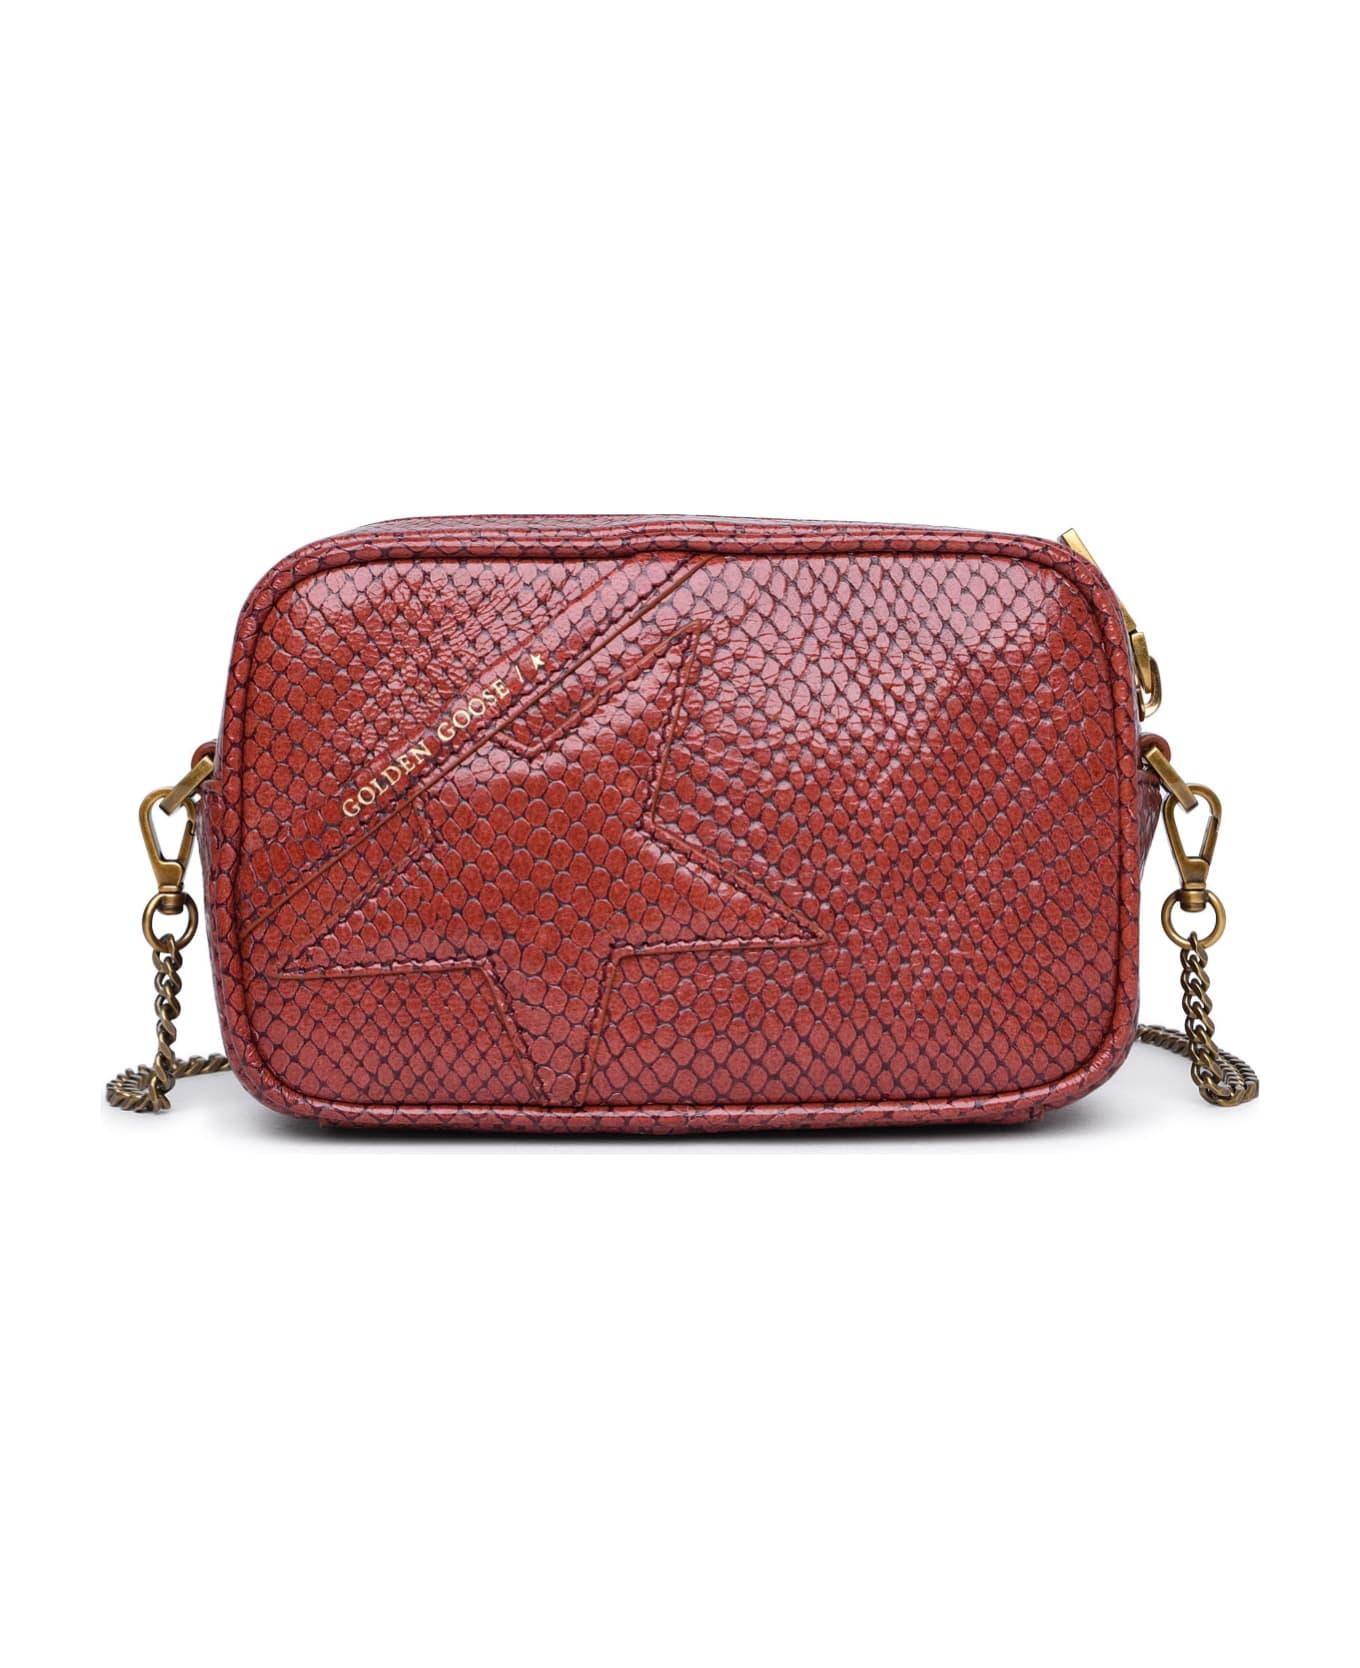 Golden Goose 'star' Mini Bag In Brown Leather - Red ショルダーバッグ